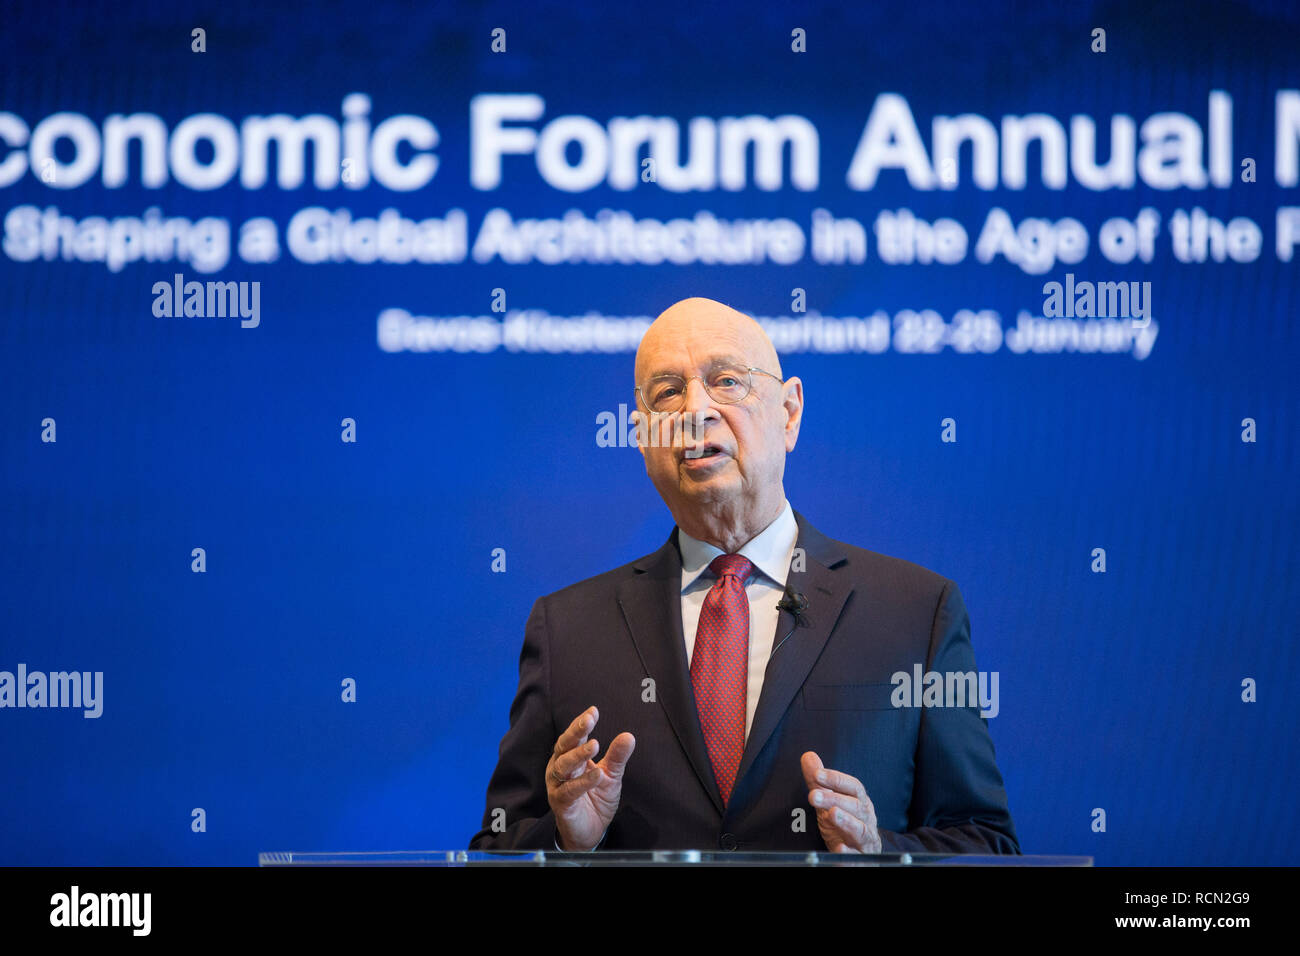 Geneva, Switzerland. 15th Jan, 2019. World Economic Forum (WEF) founder Klaus Schwab speaks at a press conference at the WEF headquarters in Geneva, Switzerland, Jan. 15, 2019. The world is entering a period of 'profound instability' due to the technological disruption of the Fourth Industrial Revolution and geo-economic and geopolitical realignment, Klaus Schwab said Tuesday. The forum's 2019 annual meeting will take place in Davos-Klosters, Switzerland from Jan. 22 to 25. Credit: Xu Jinquan/Xinhua/Alamy Live News Stock Photo